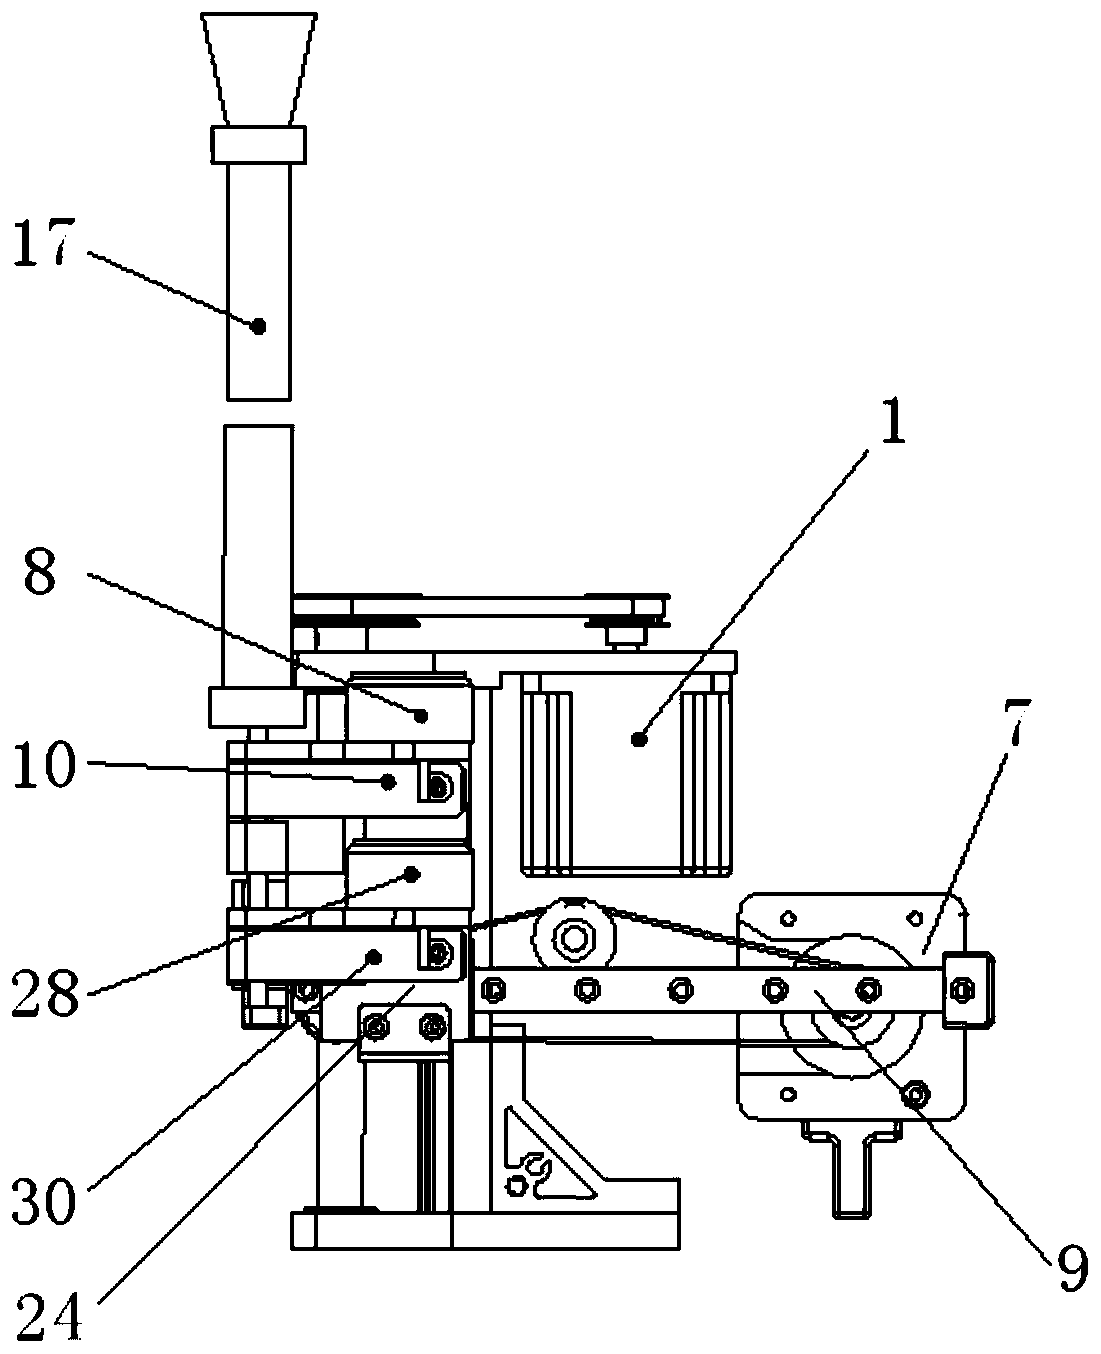 Filter stick cutting and section detecting device